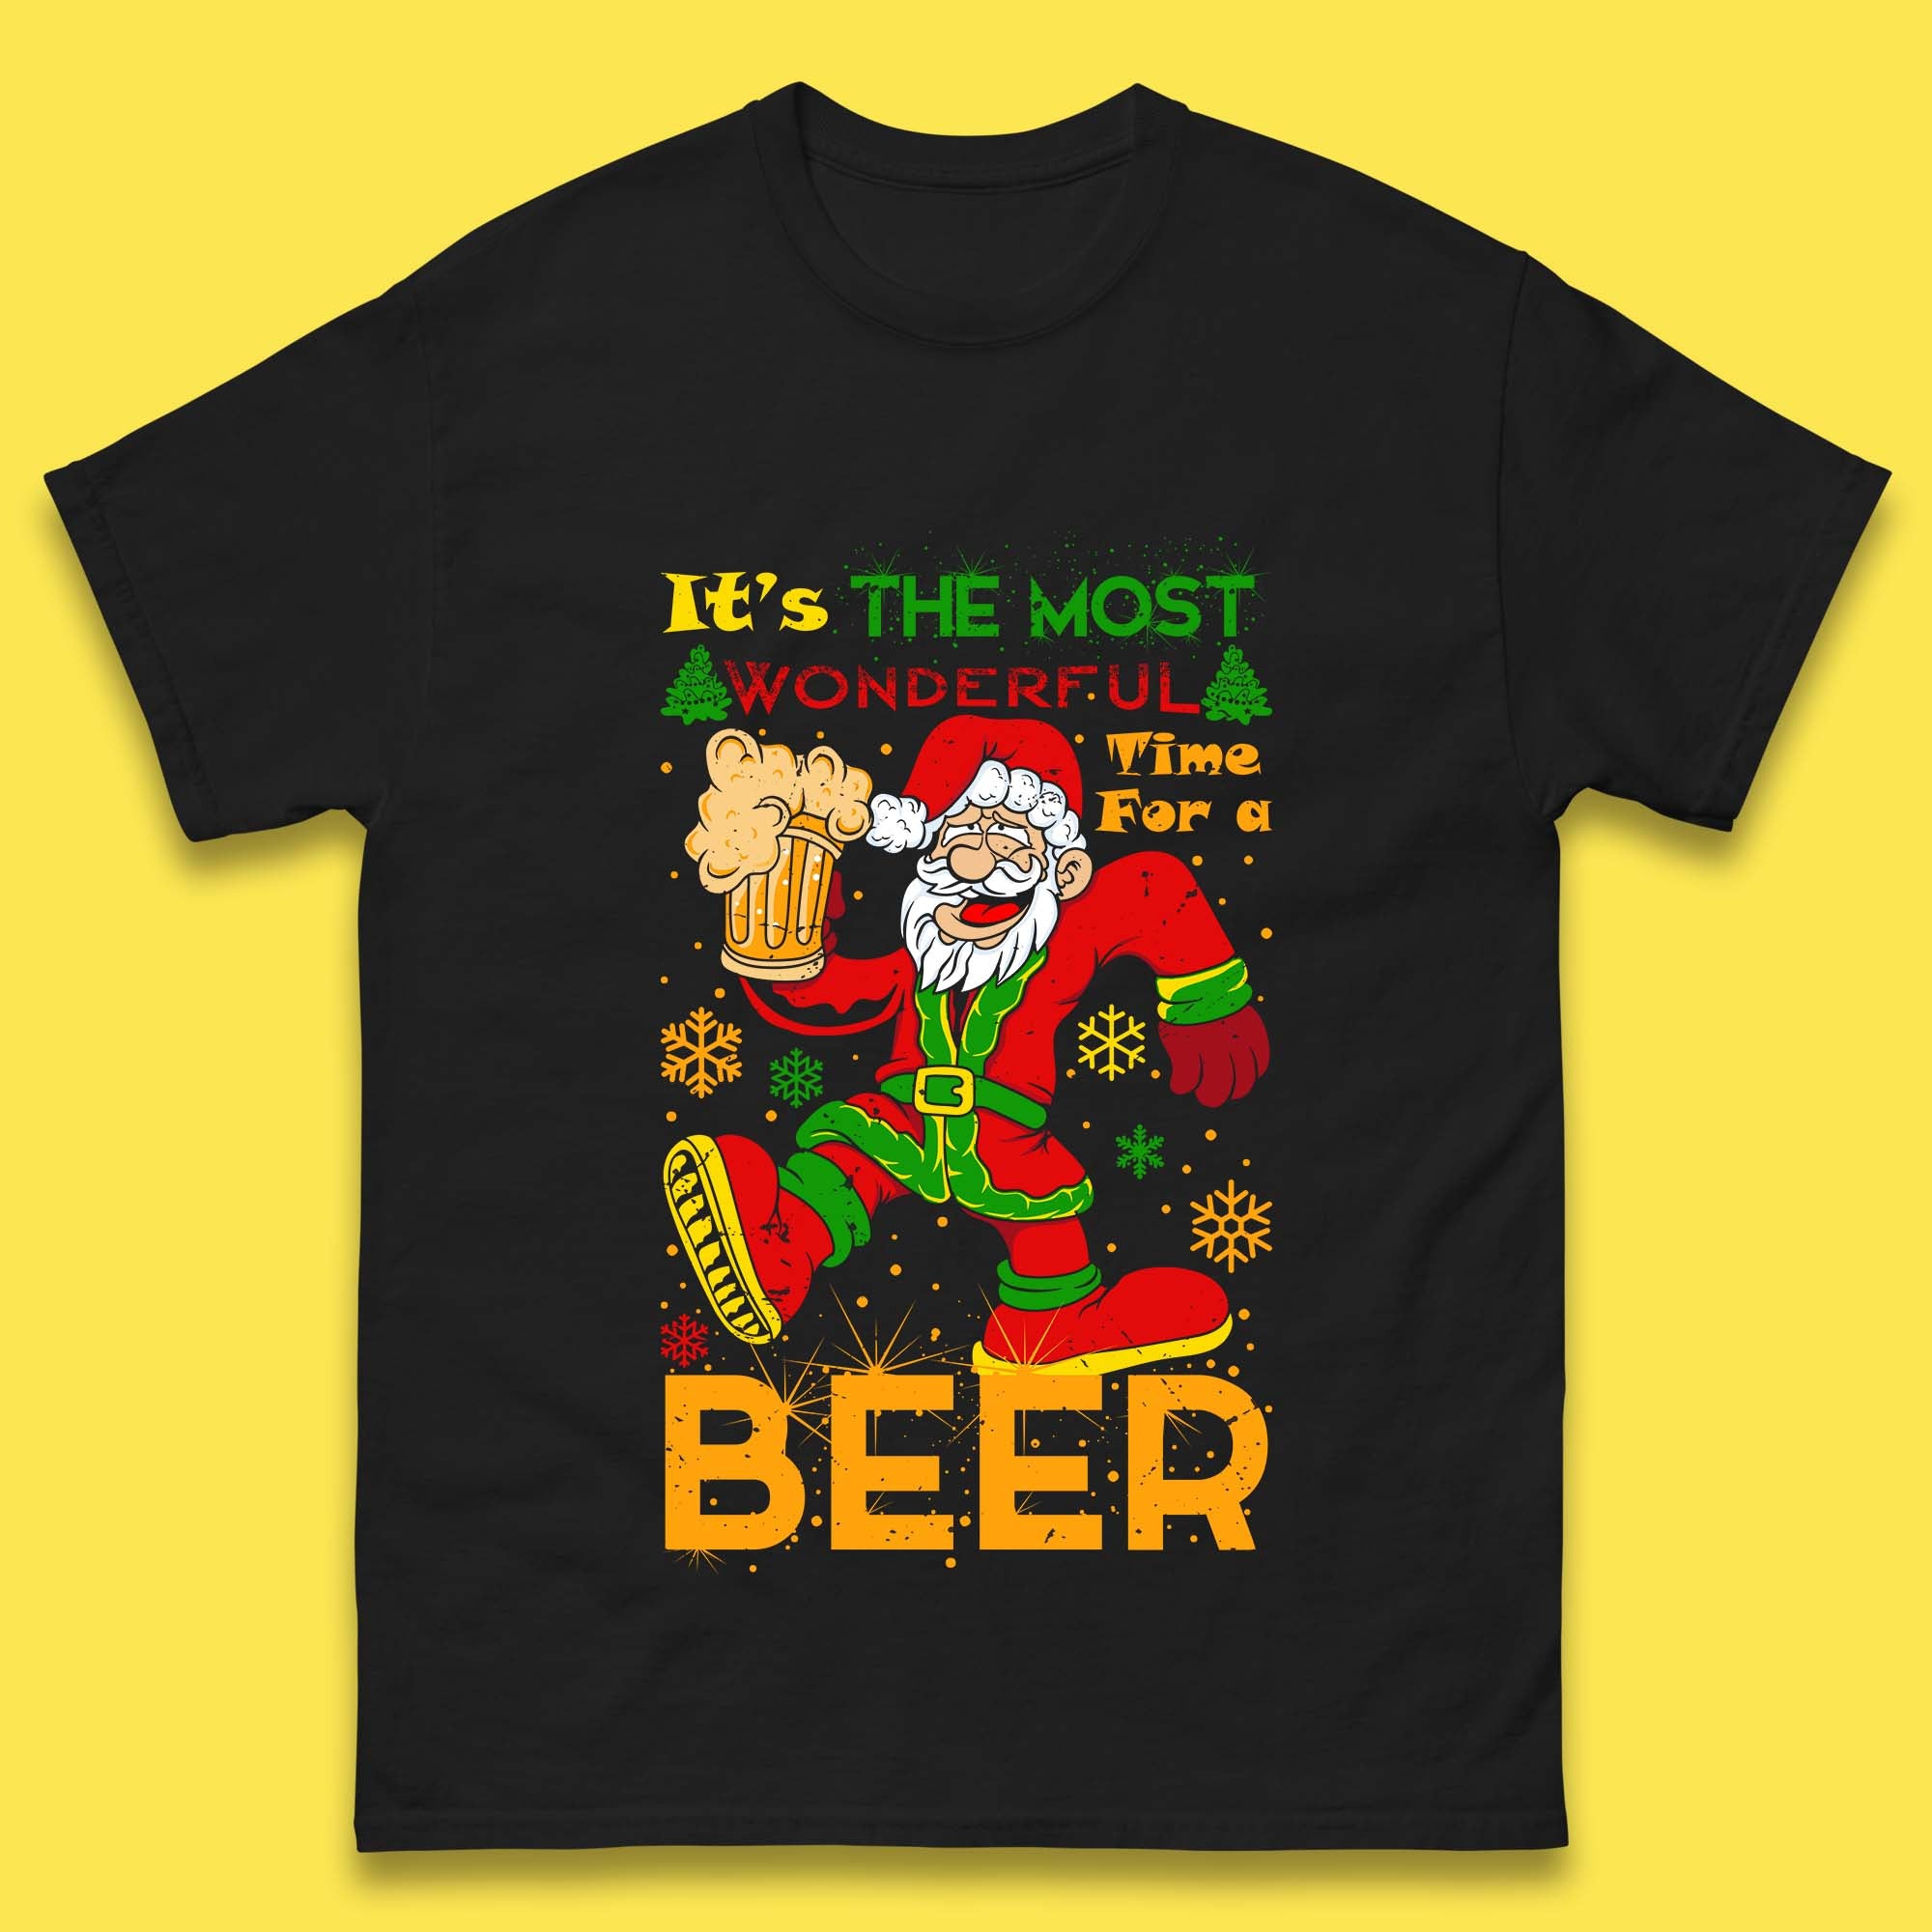 Most Wonderful Time for a Beer T-Shirt